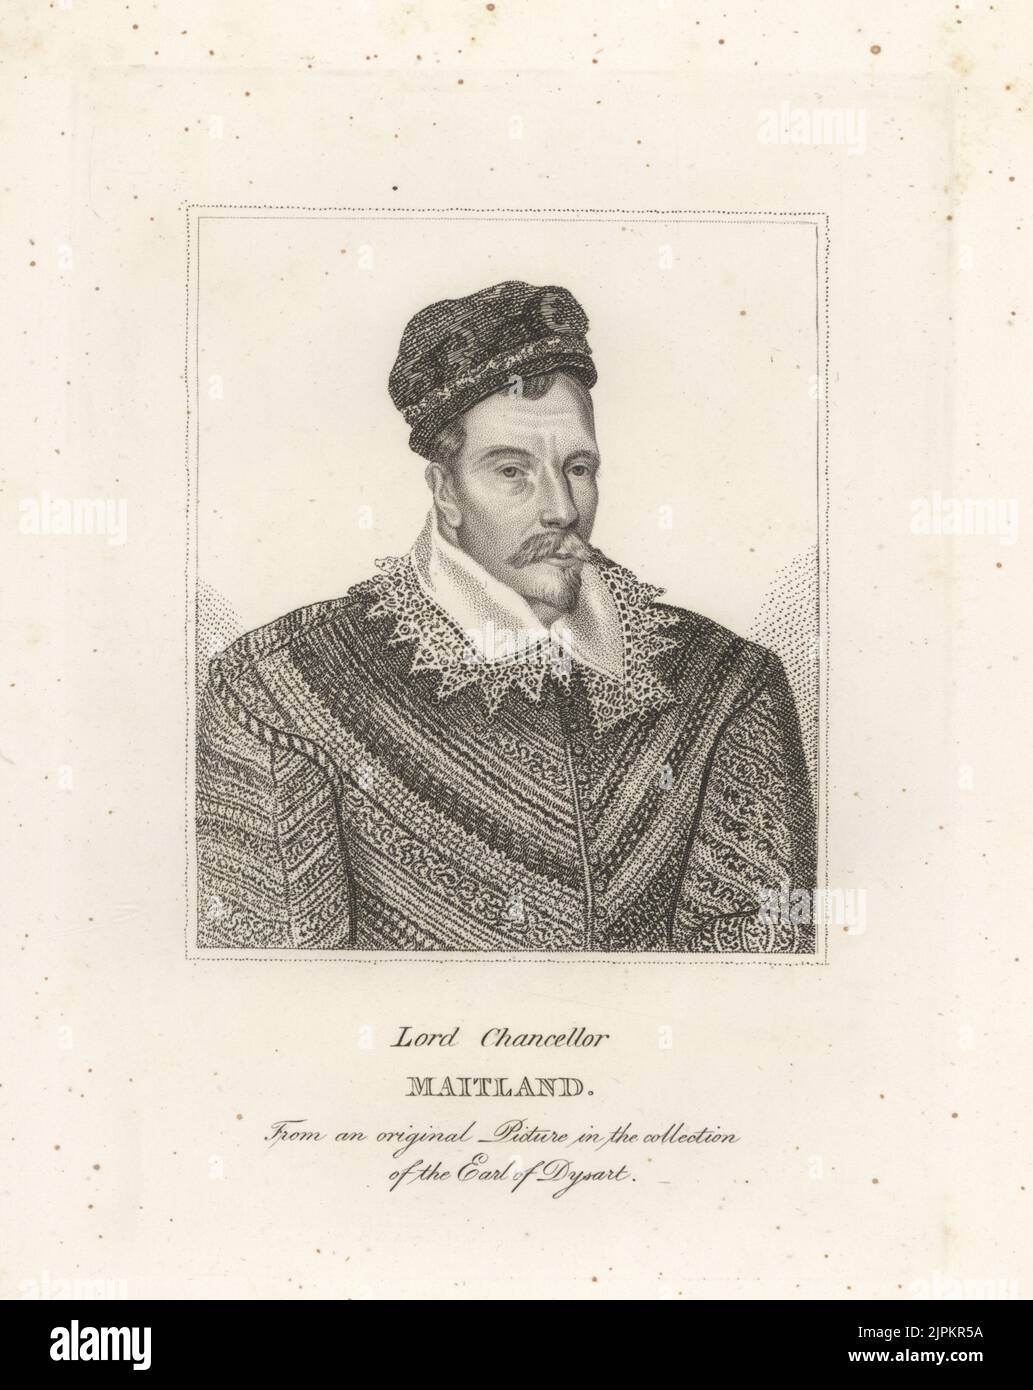 John Maitland, 1st Lord Maitland of Thirlestane, 1537-1595. Lord Chancellor of Scotland. In cap, lace collar, doublet. From an original picture in the collection of the Earl of Dysart at Ham House. Copperplate engraving from Samuel Woodburn’s Gallery of Rare Portraits Consisting of Original Plates, George Jones, 102 St Martin’s Lane, London, 1816. Stock Photo